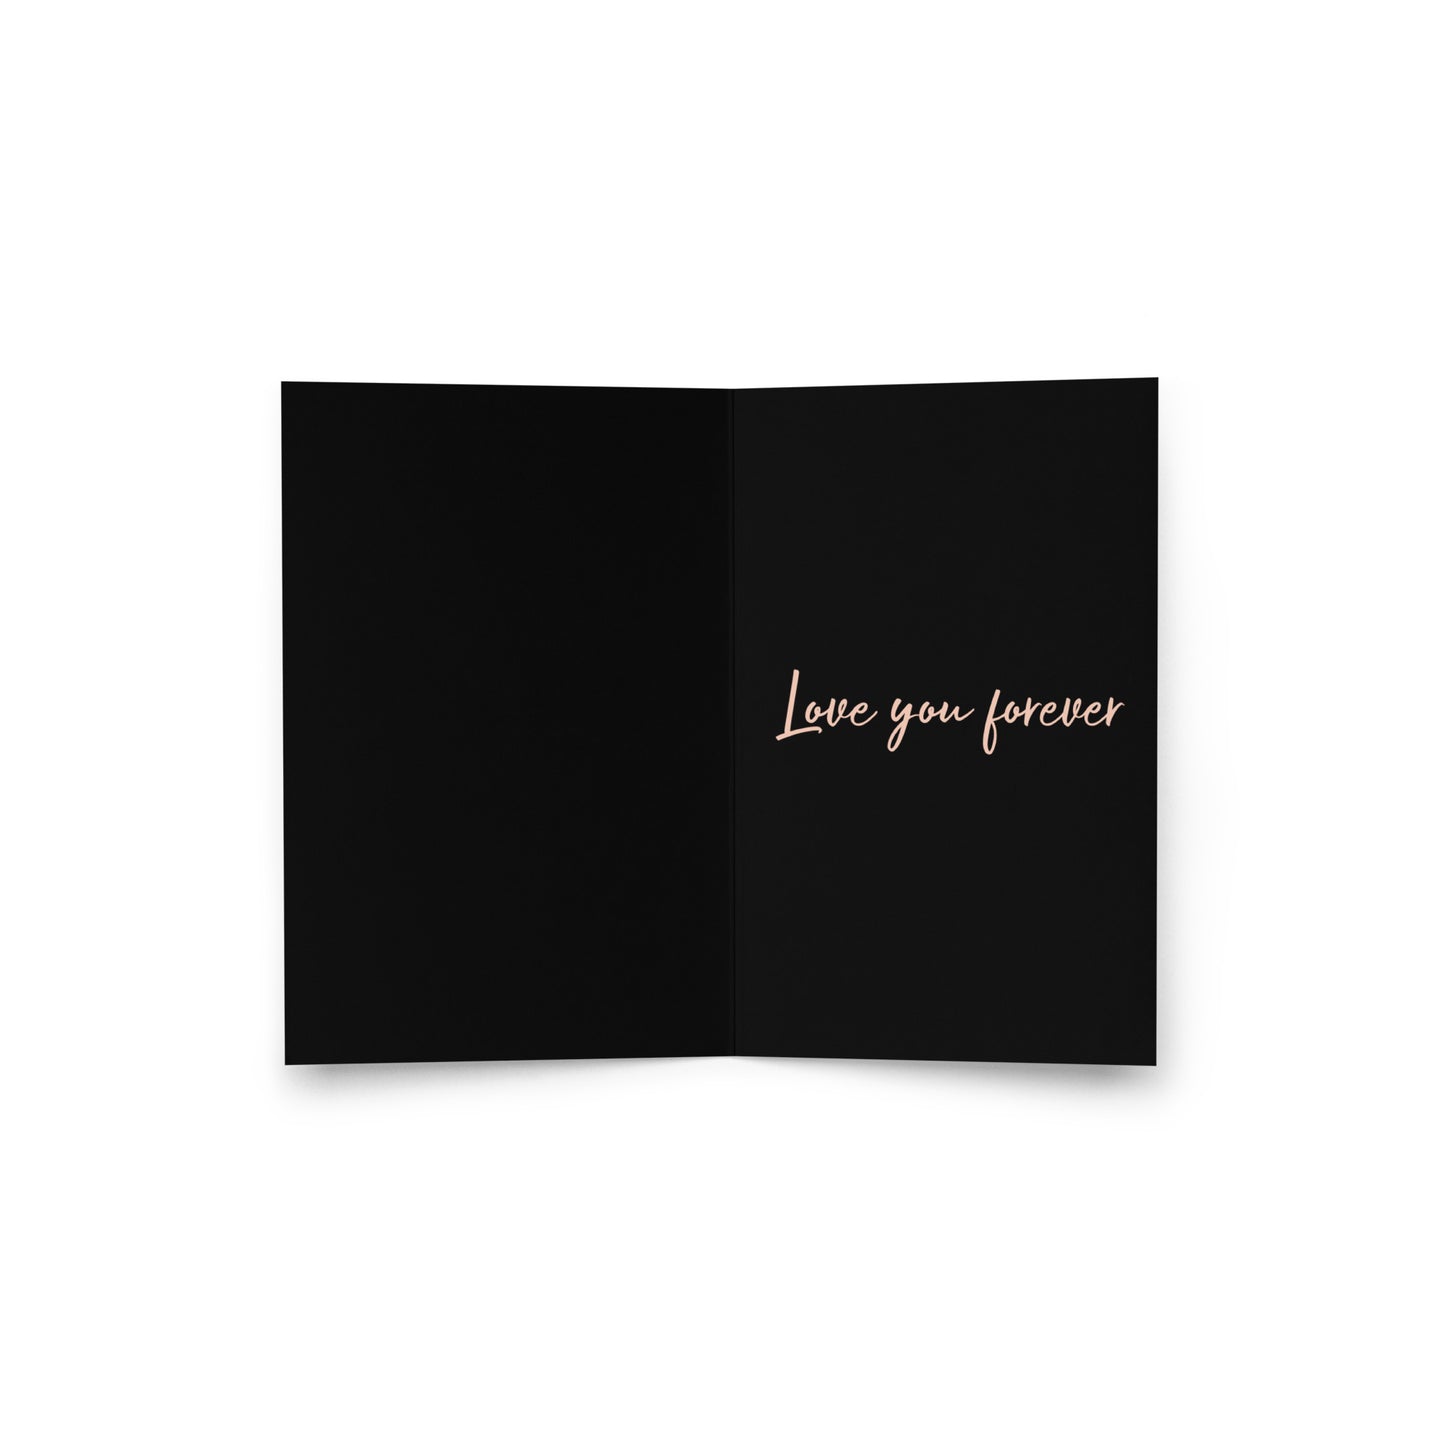 The Lovers Valentines Greeting card